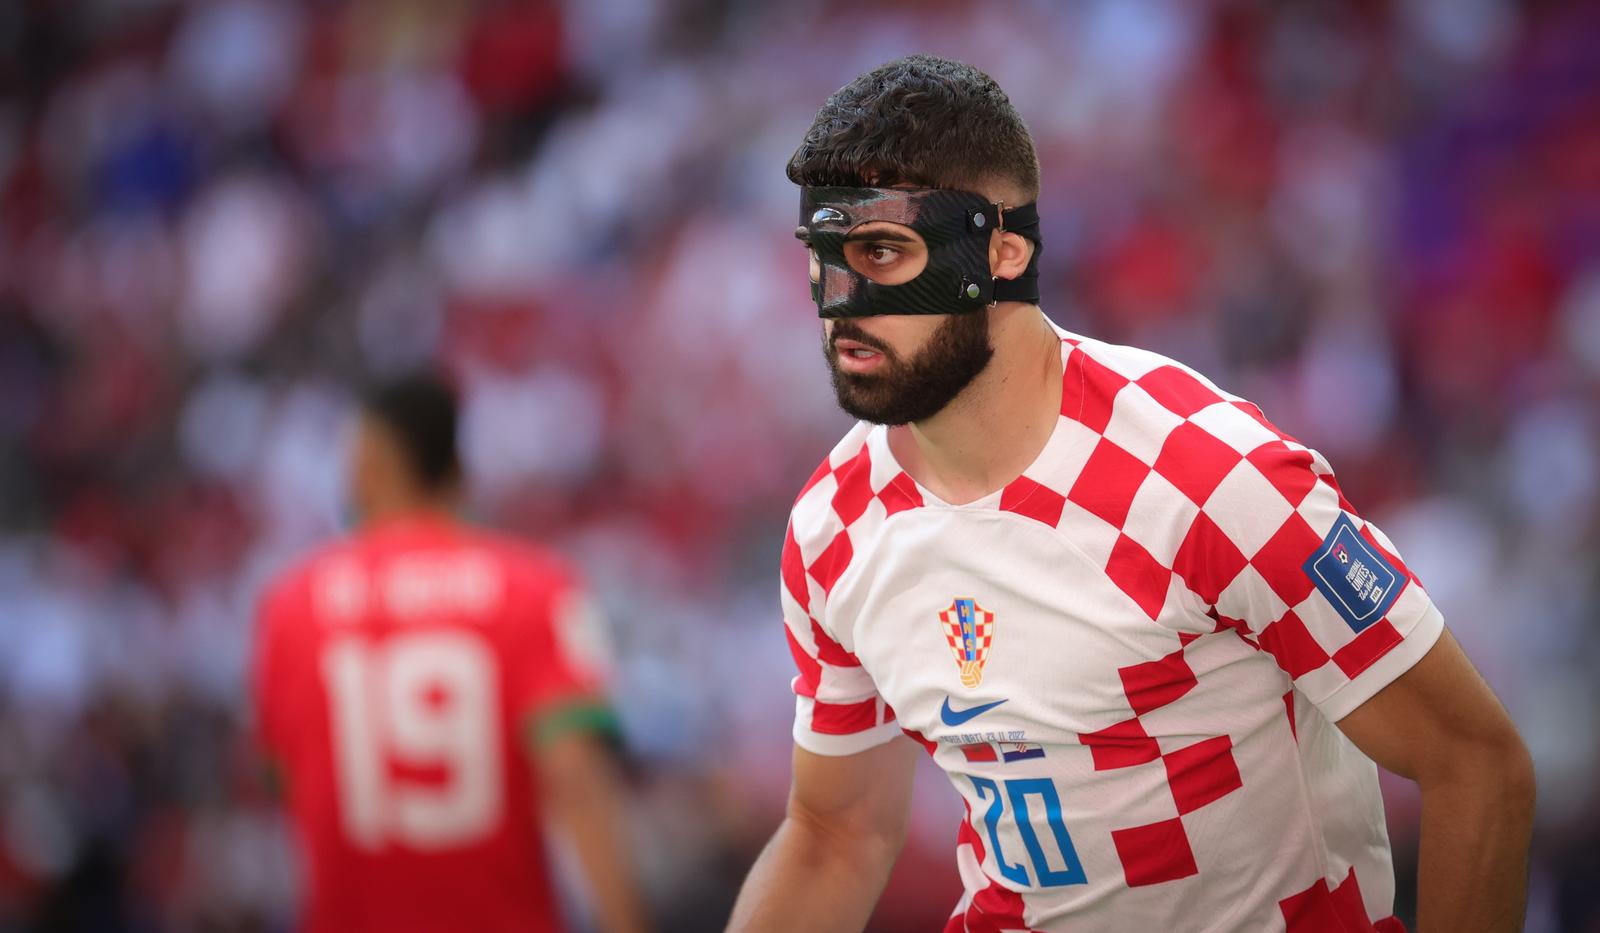 Croatian Josko Gvardiol pictured during a soccer game between Morocco and Croatia, in Group F of the FIFA 2022 World Cup in Al Khor, State of Qatar on Wednesday 23 November 2022. BELGA PHOTO VIRGINIE LEFOUR Photo: VIRGINIE LEFOUR/PIXSELL